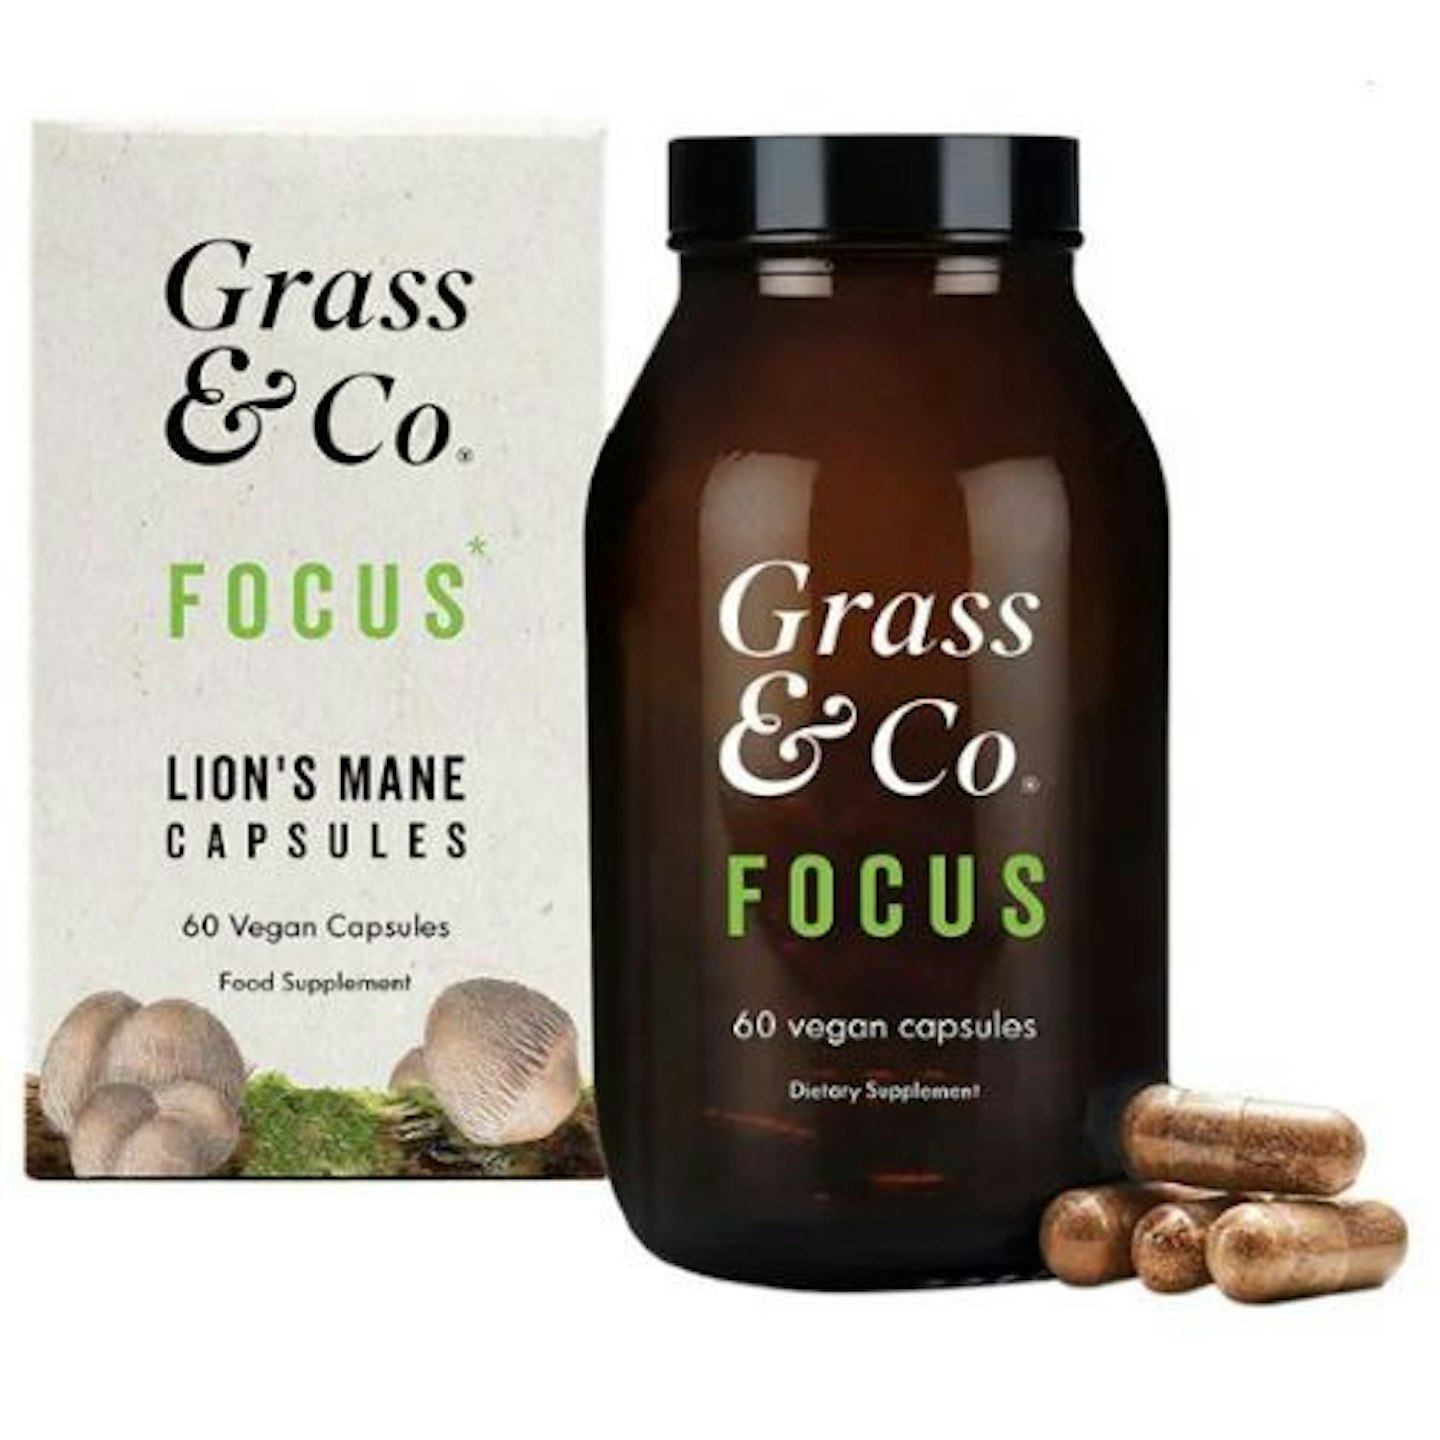 Grass & Co. FOCUS Lion's Mane Mushrooms with Ginseng + Omega-3